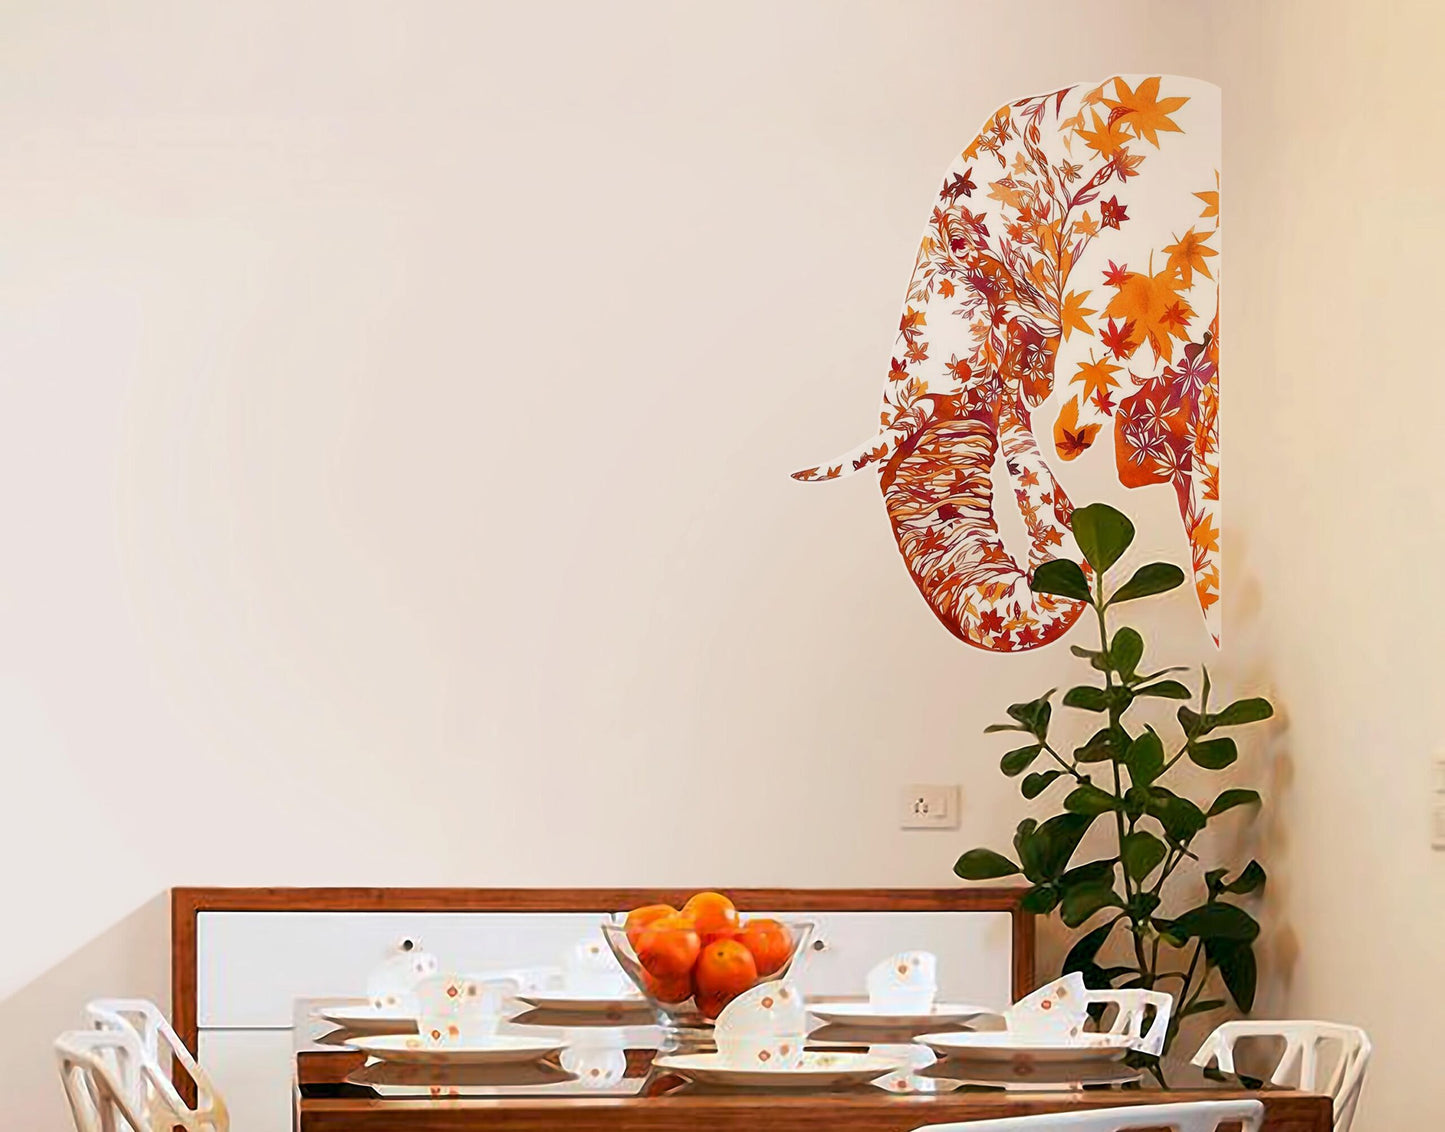 Different Countries Leaves elephant wall sticker